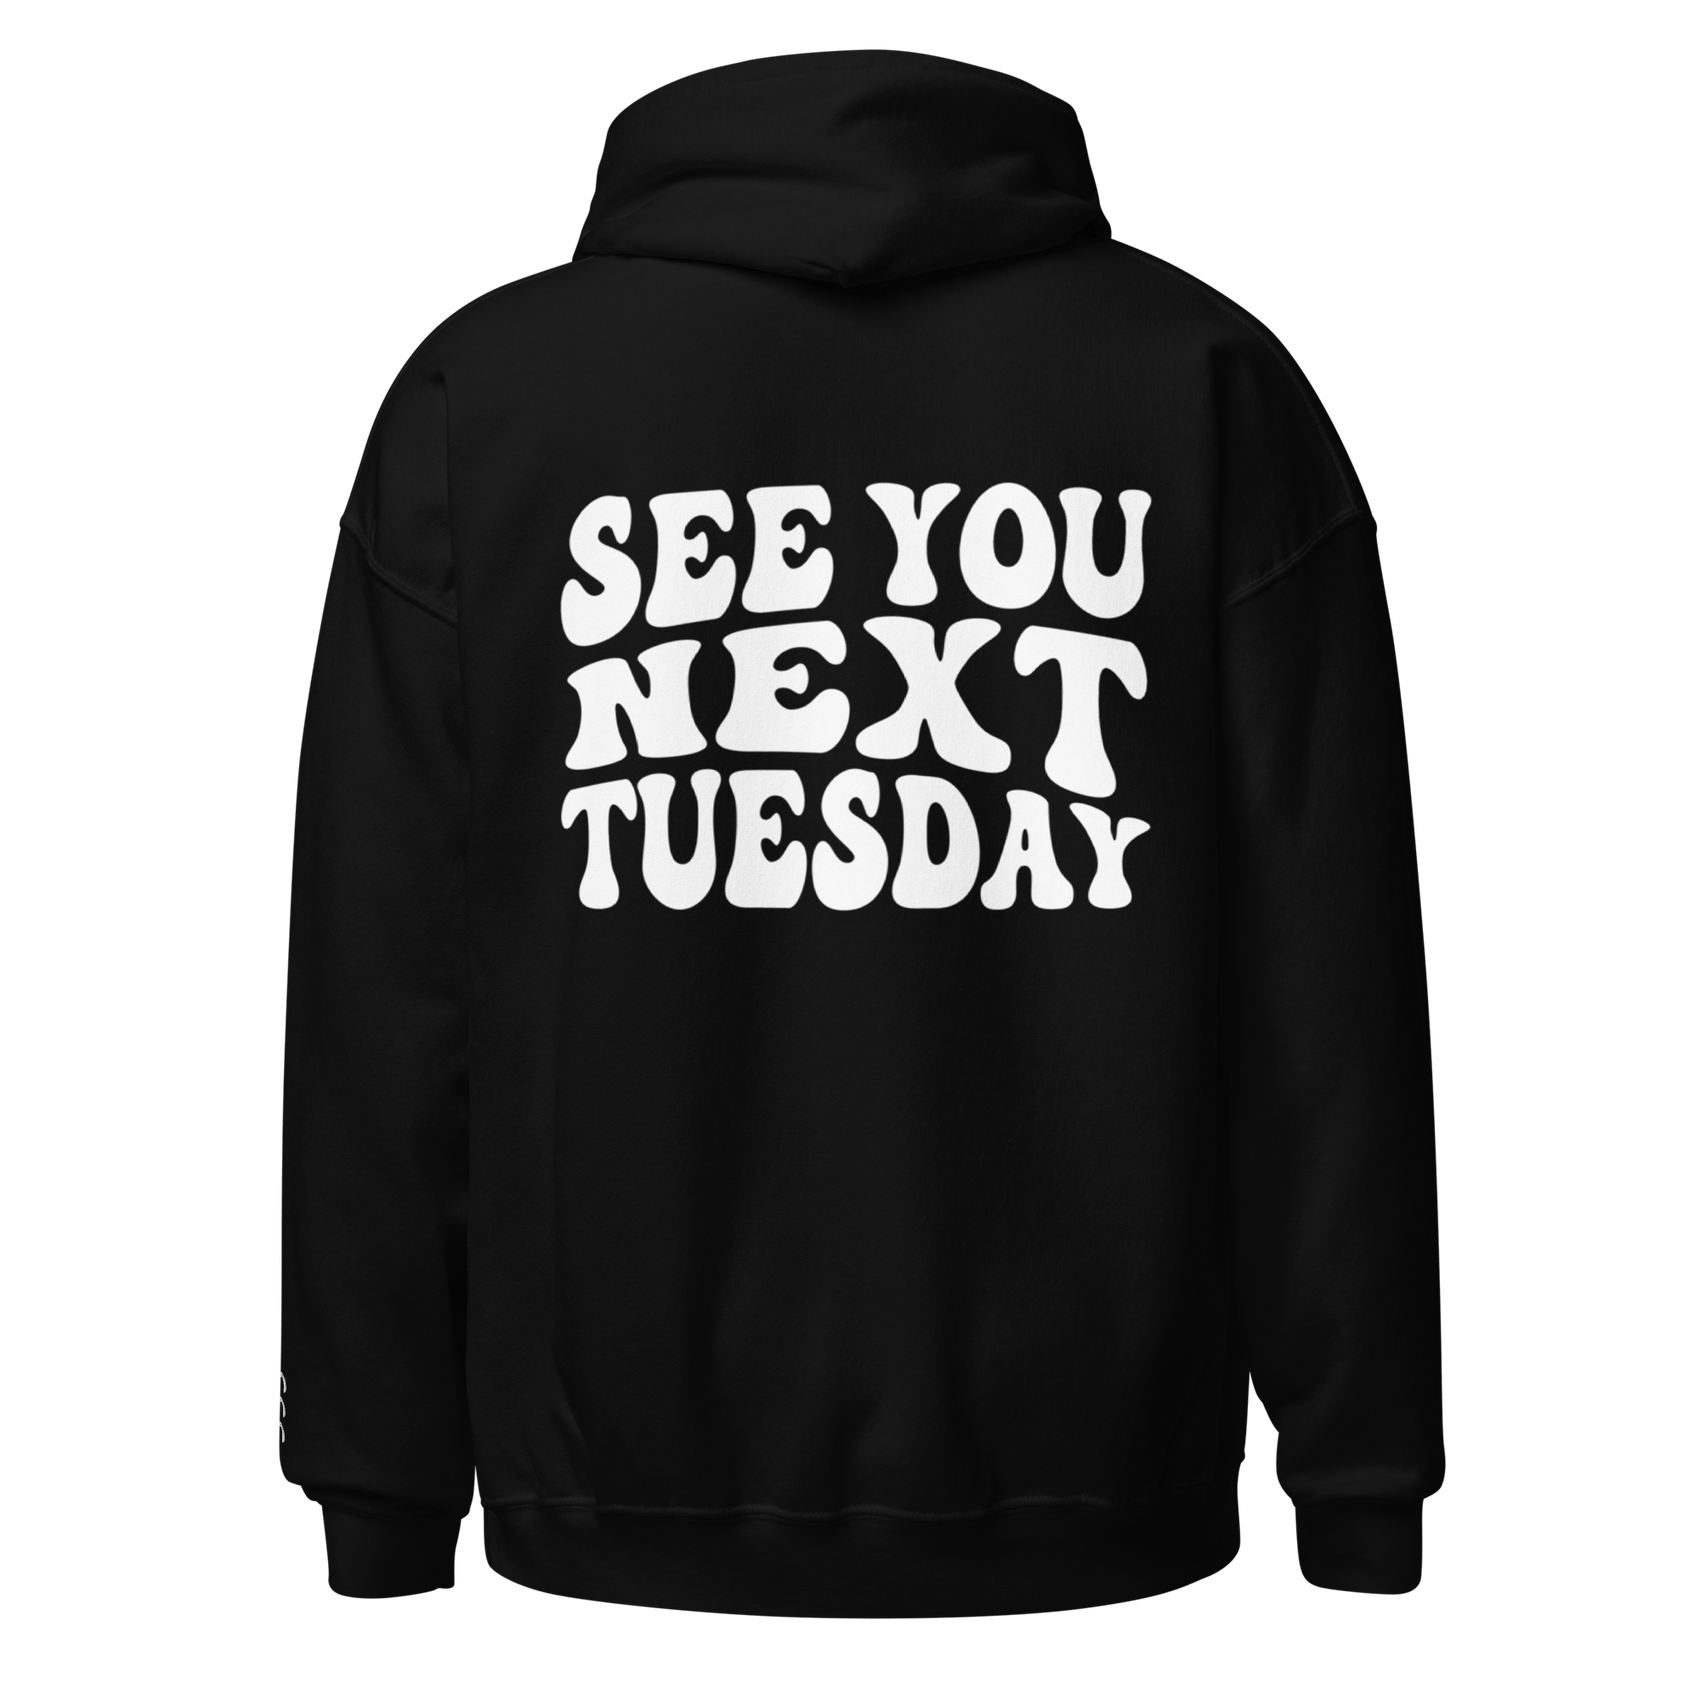 See You Next Tuesday Black Hoodie - James Kennedy Merch